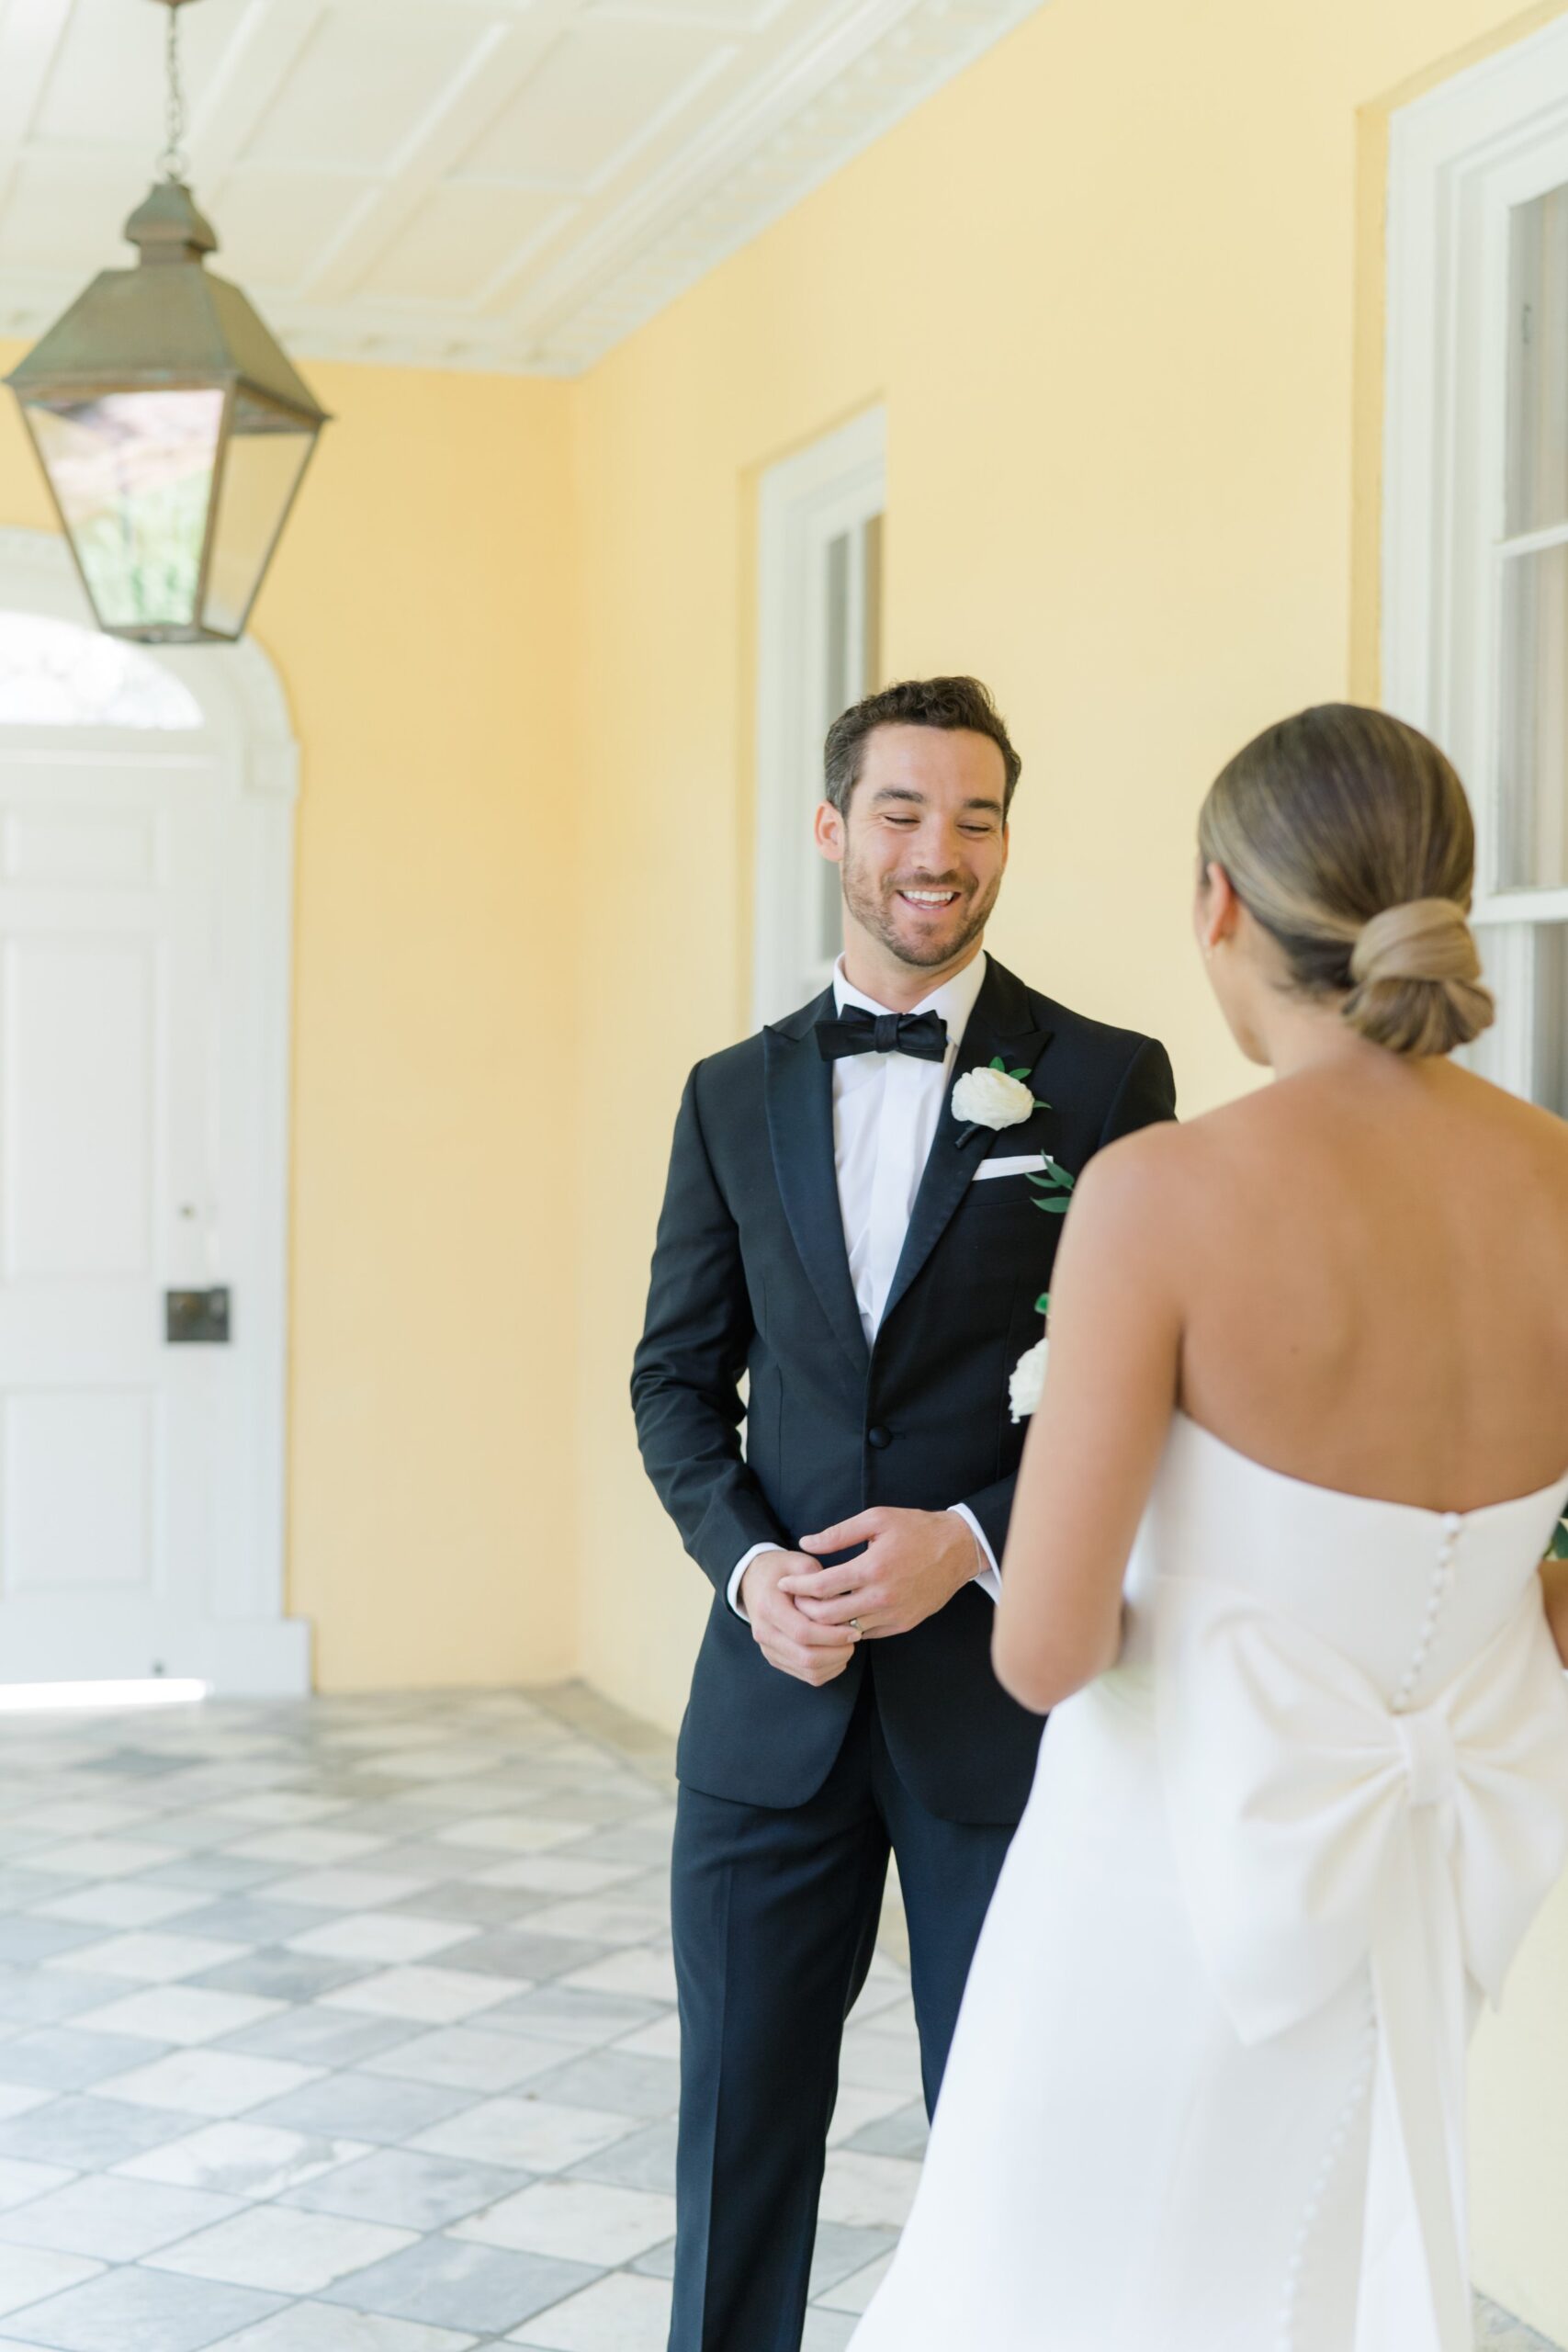 Groom sees bride for the first time on wedding day.